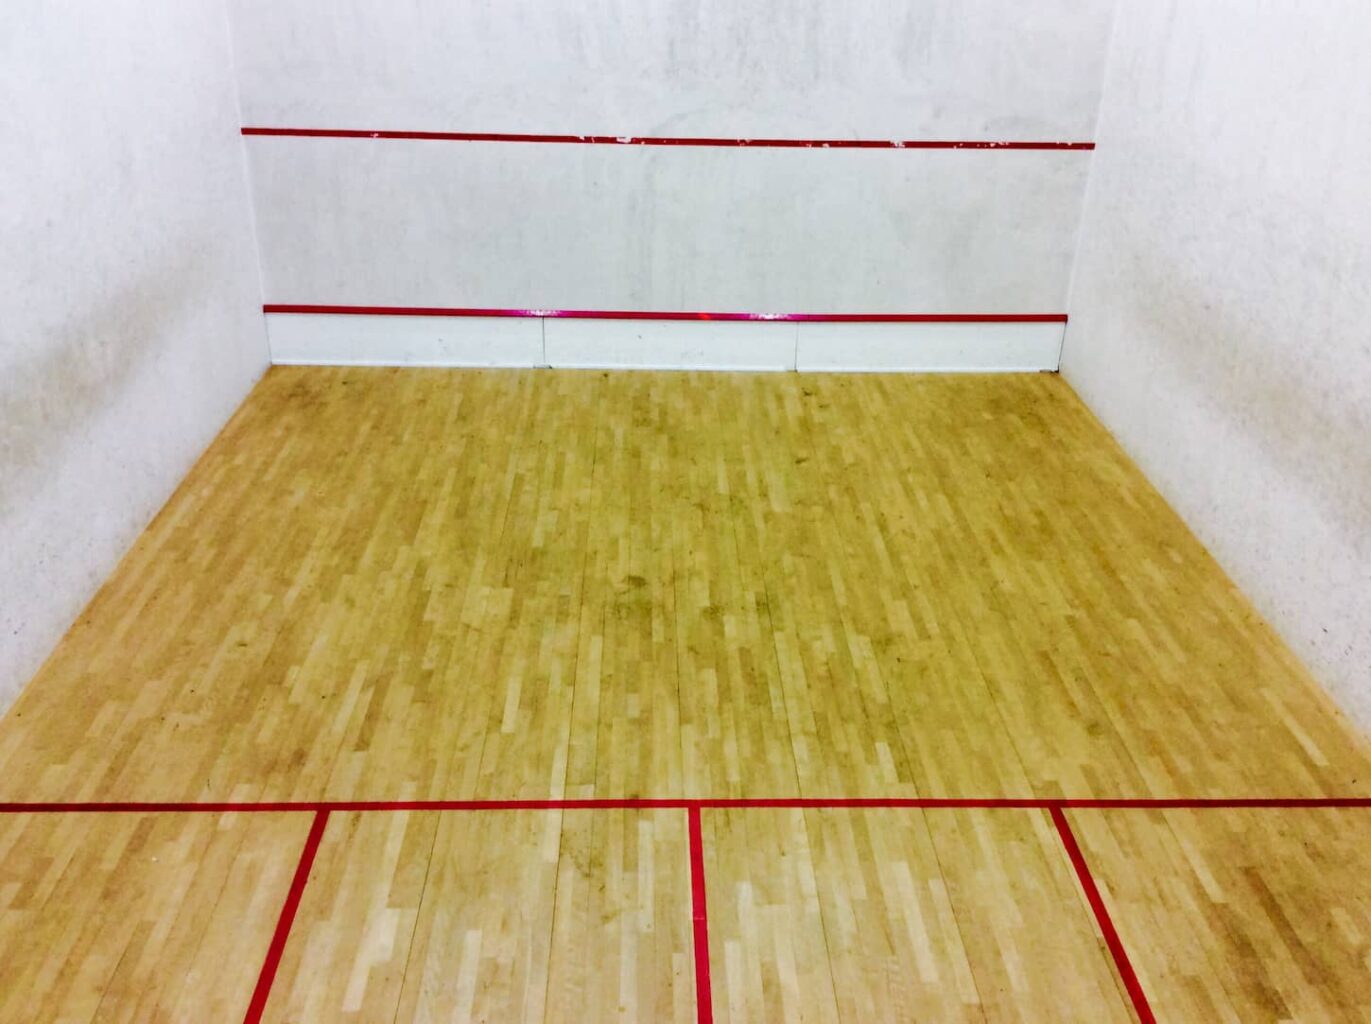 An image of an Empty squash or racquetball court.